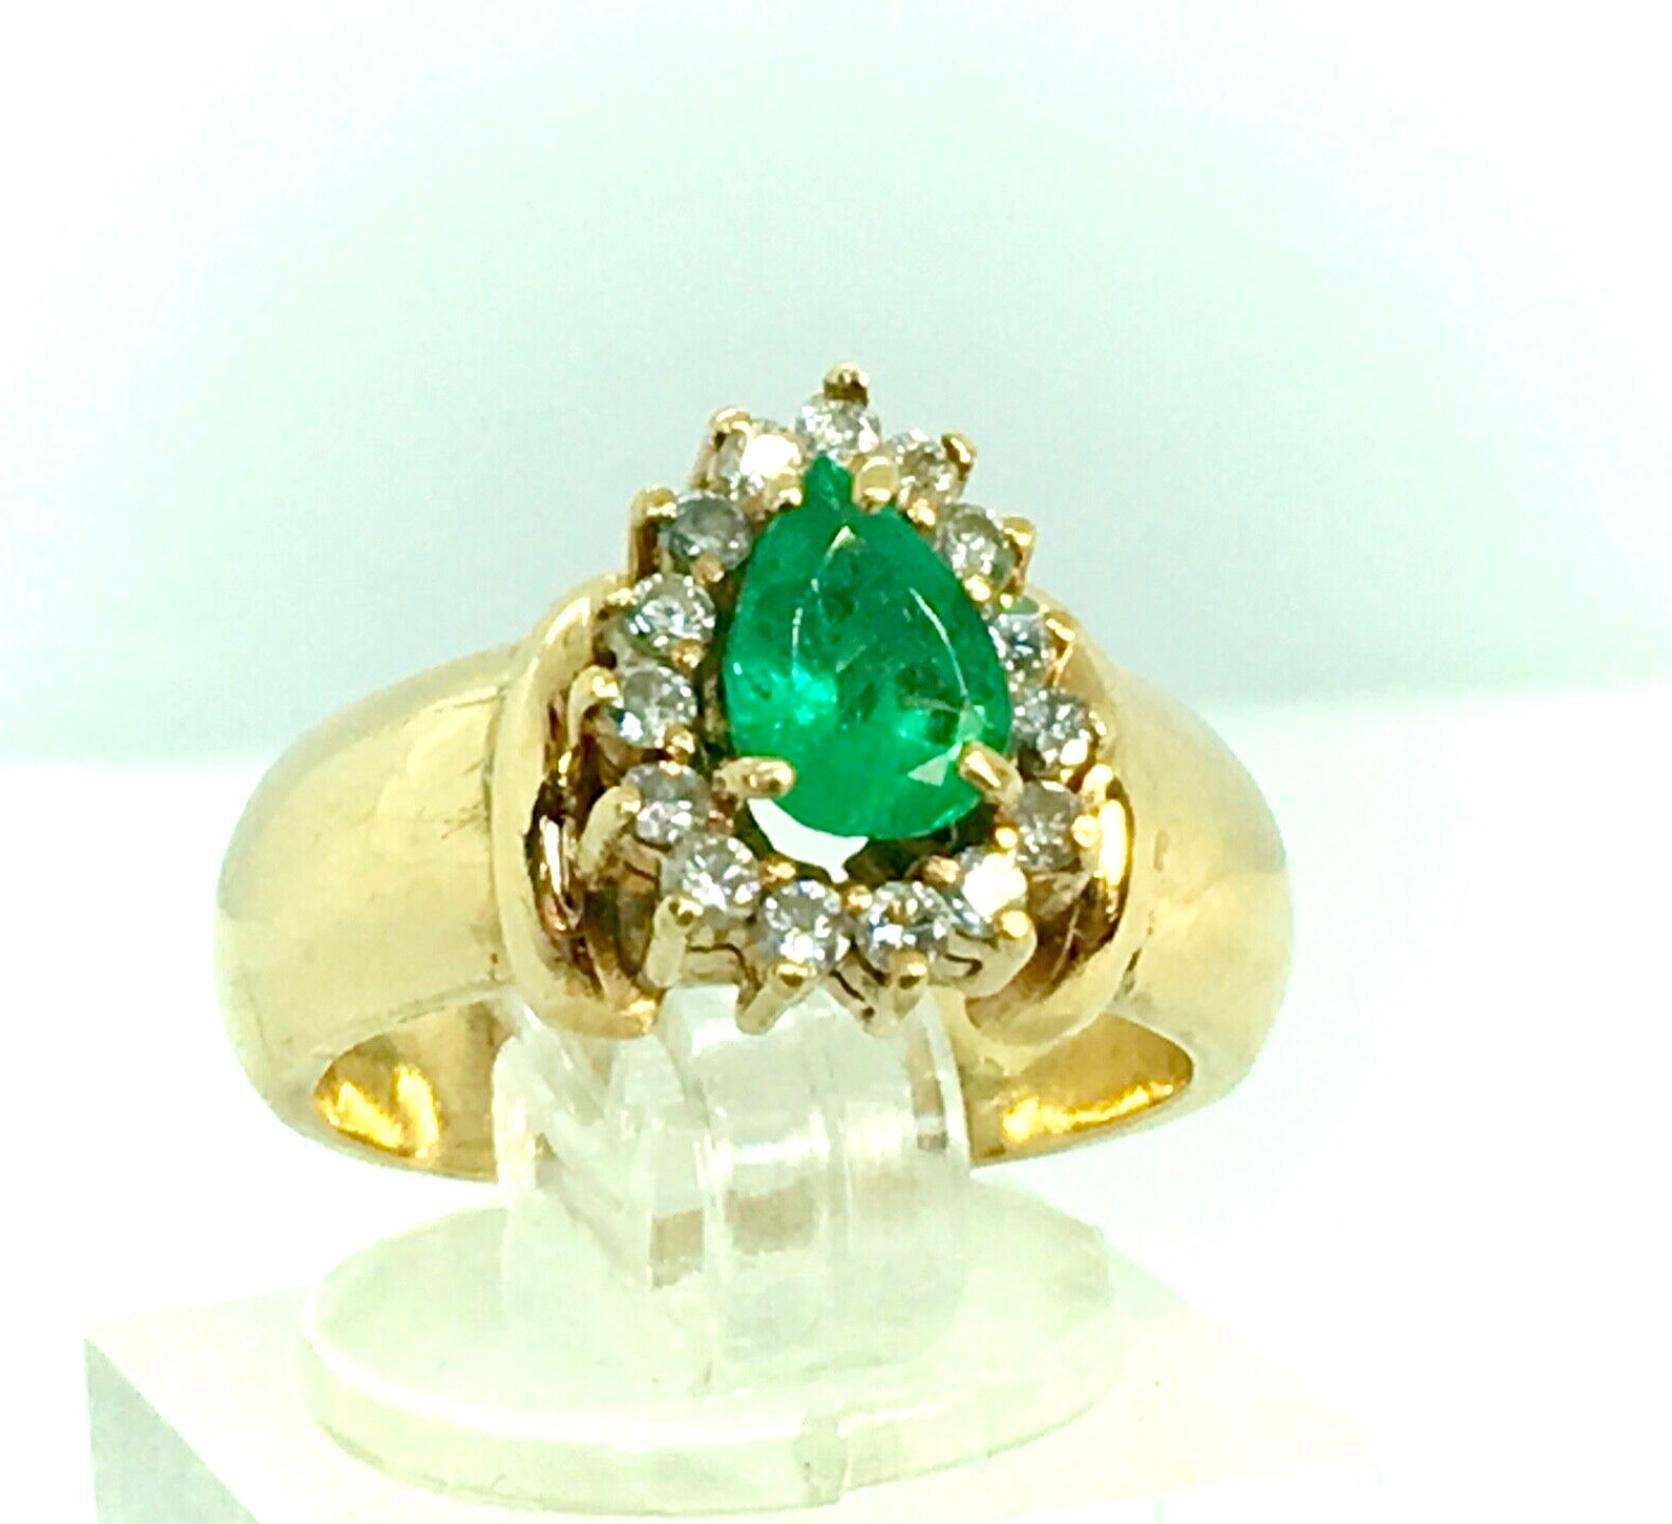        
A Vintage Natural Colombian Emerald and Diamonds Ring Solid 18K Yellow Gold
Centered with a Natural Colombian Emerald Pear Cut, weighing approx. 1.10 Carat, Vivid Medium Green. Surrounded by 14 round Diamonds weigh Approx 0.50ct
Color